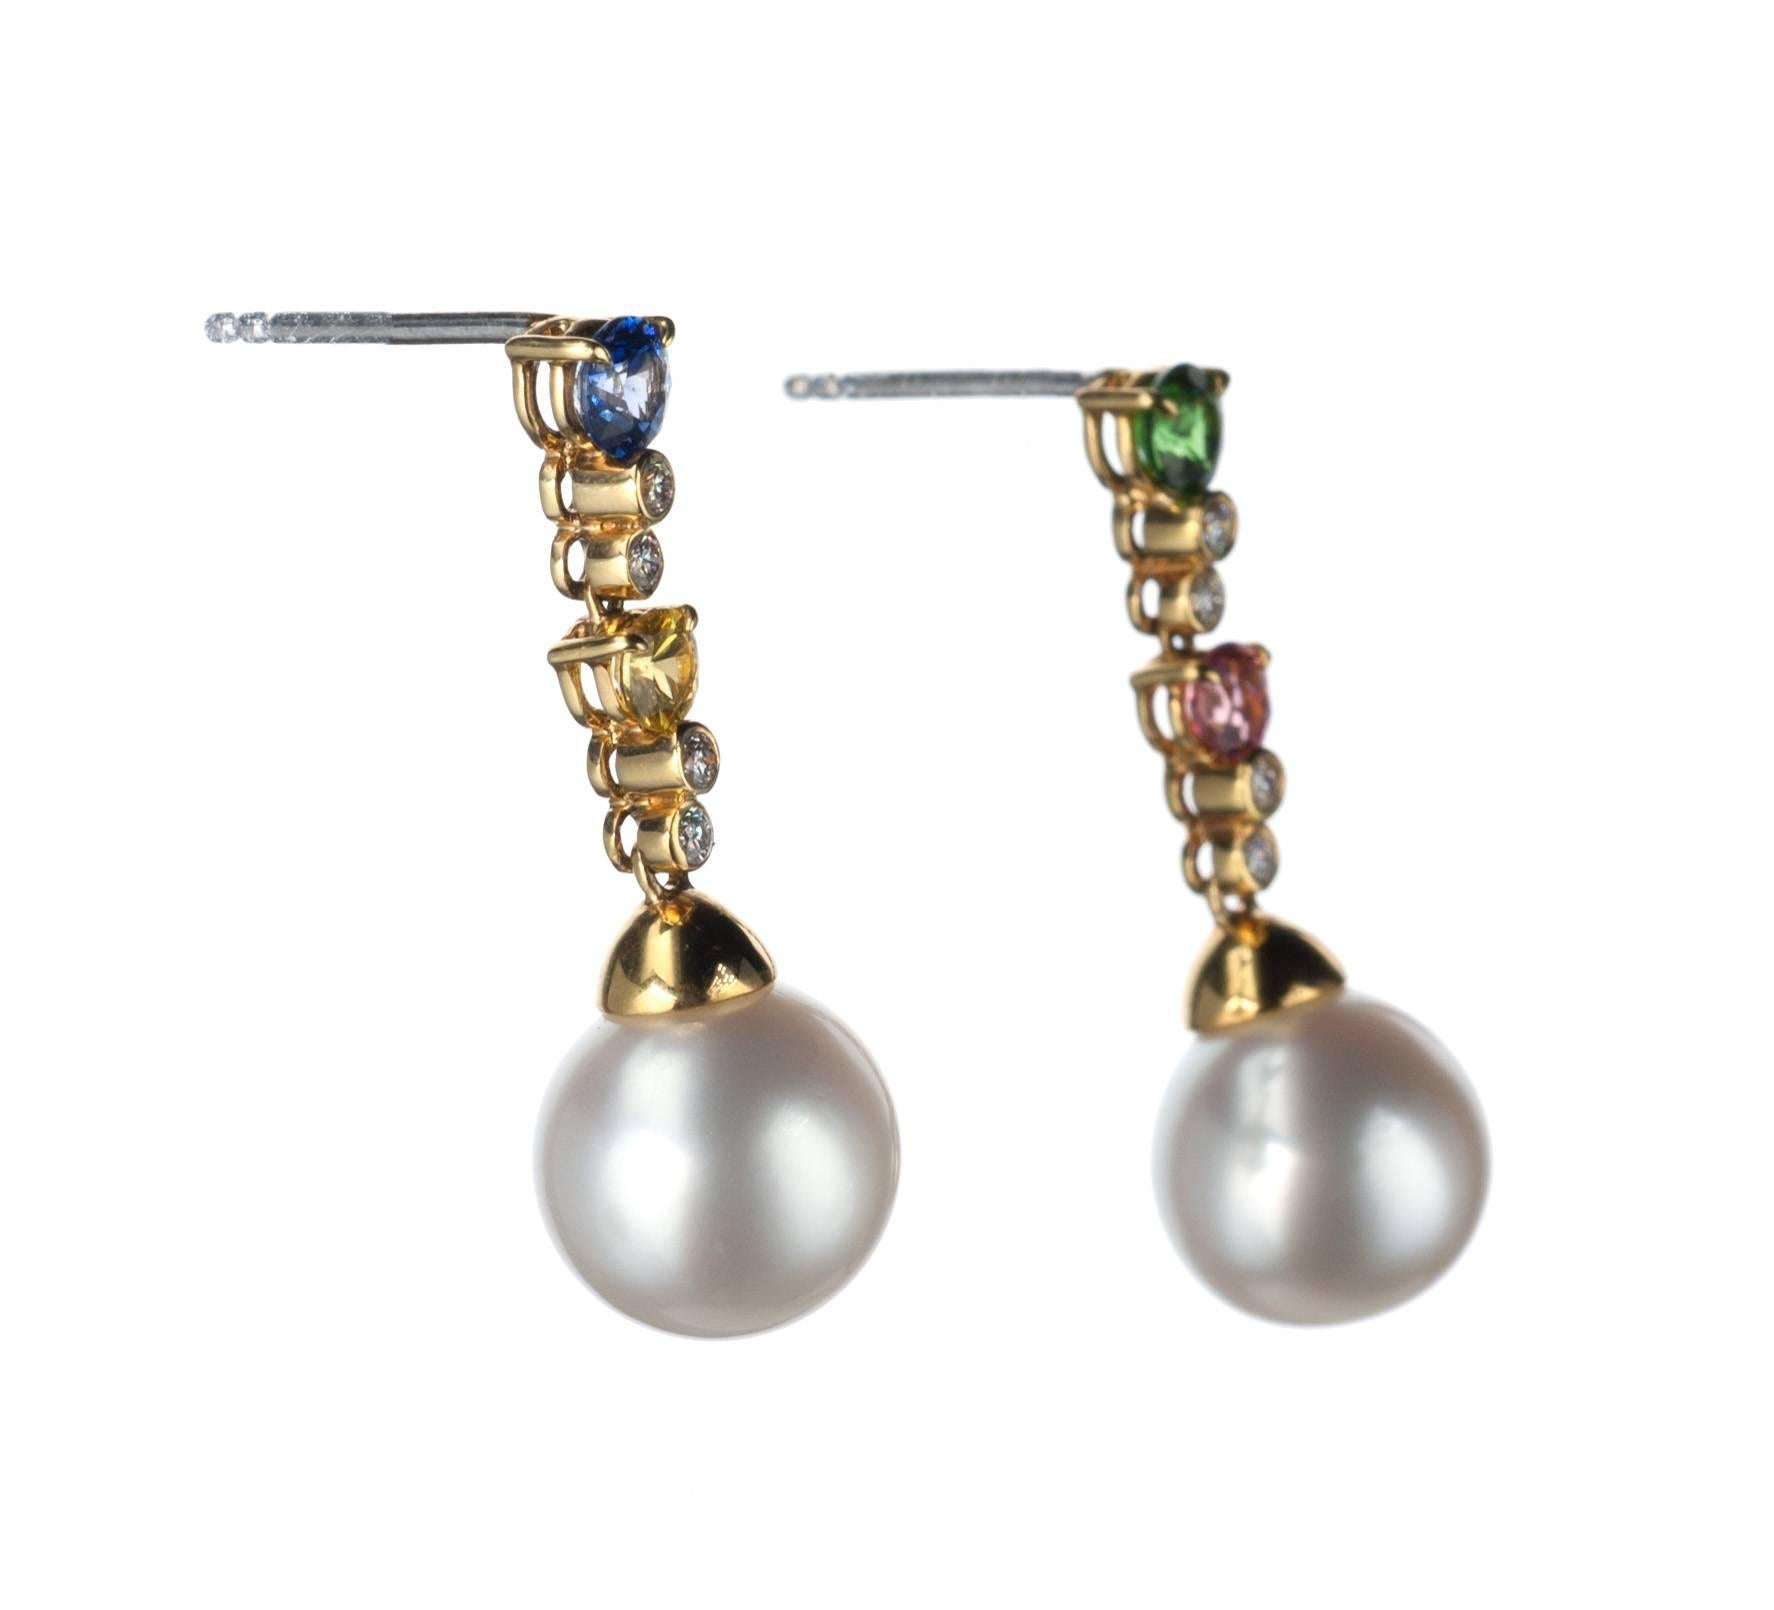 A playful pair of pearl drop earrings, from German designer Schoeffel, are set with a pair of south sea cultured pearls, approx. 10mm. Eight brilliant-cut round diamonds, .12ctw. of G color and VS clarity, are set in 18-karat yellow gold along with